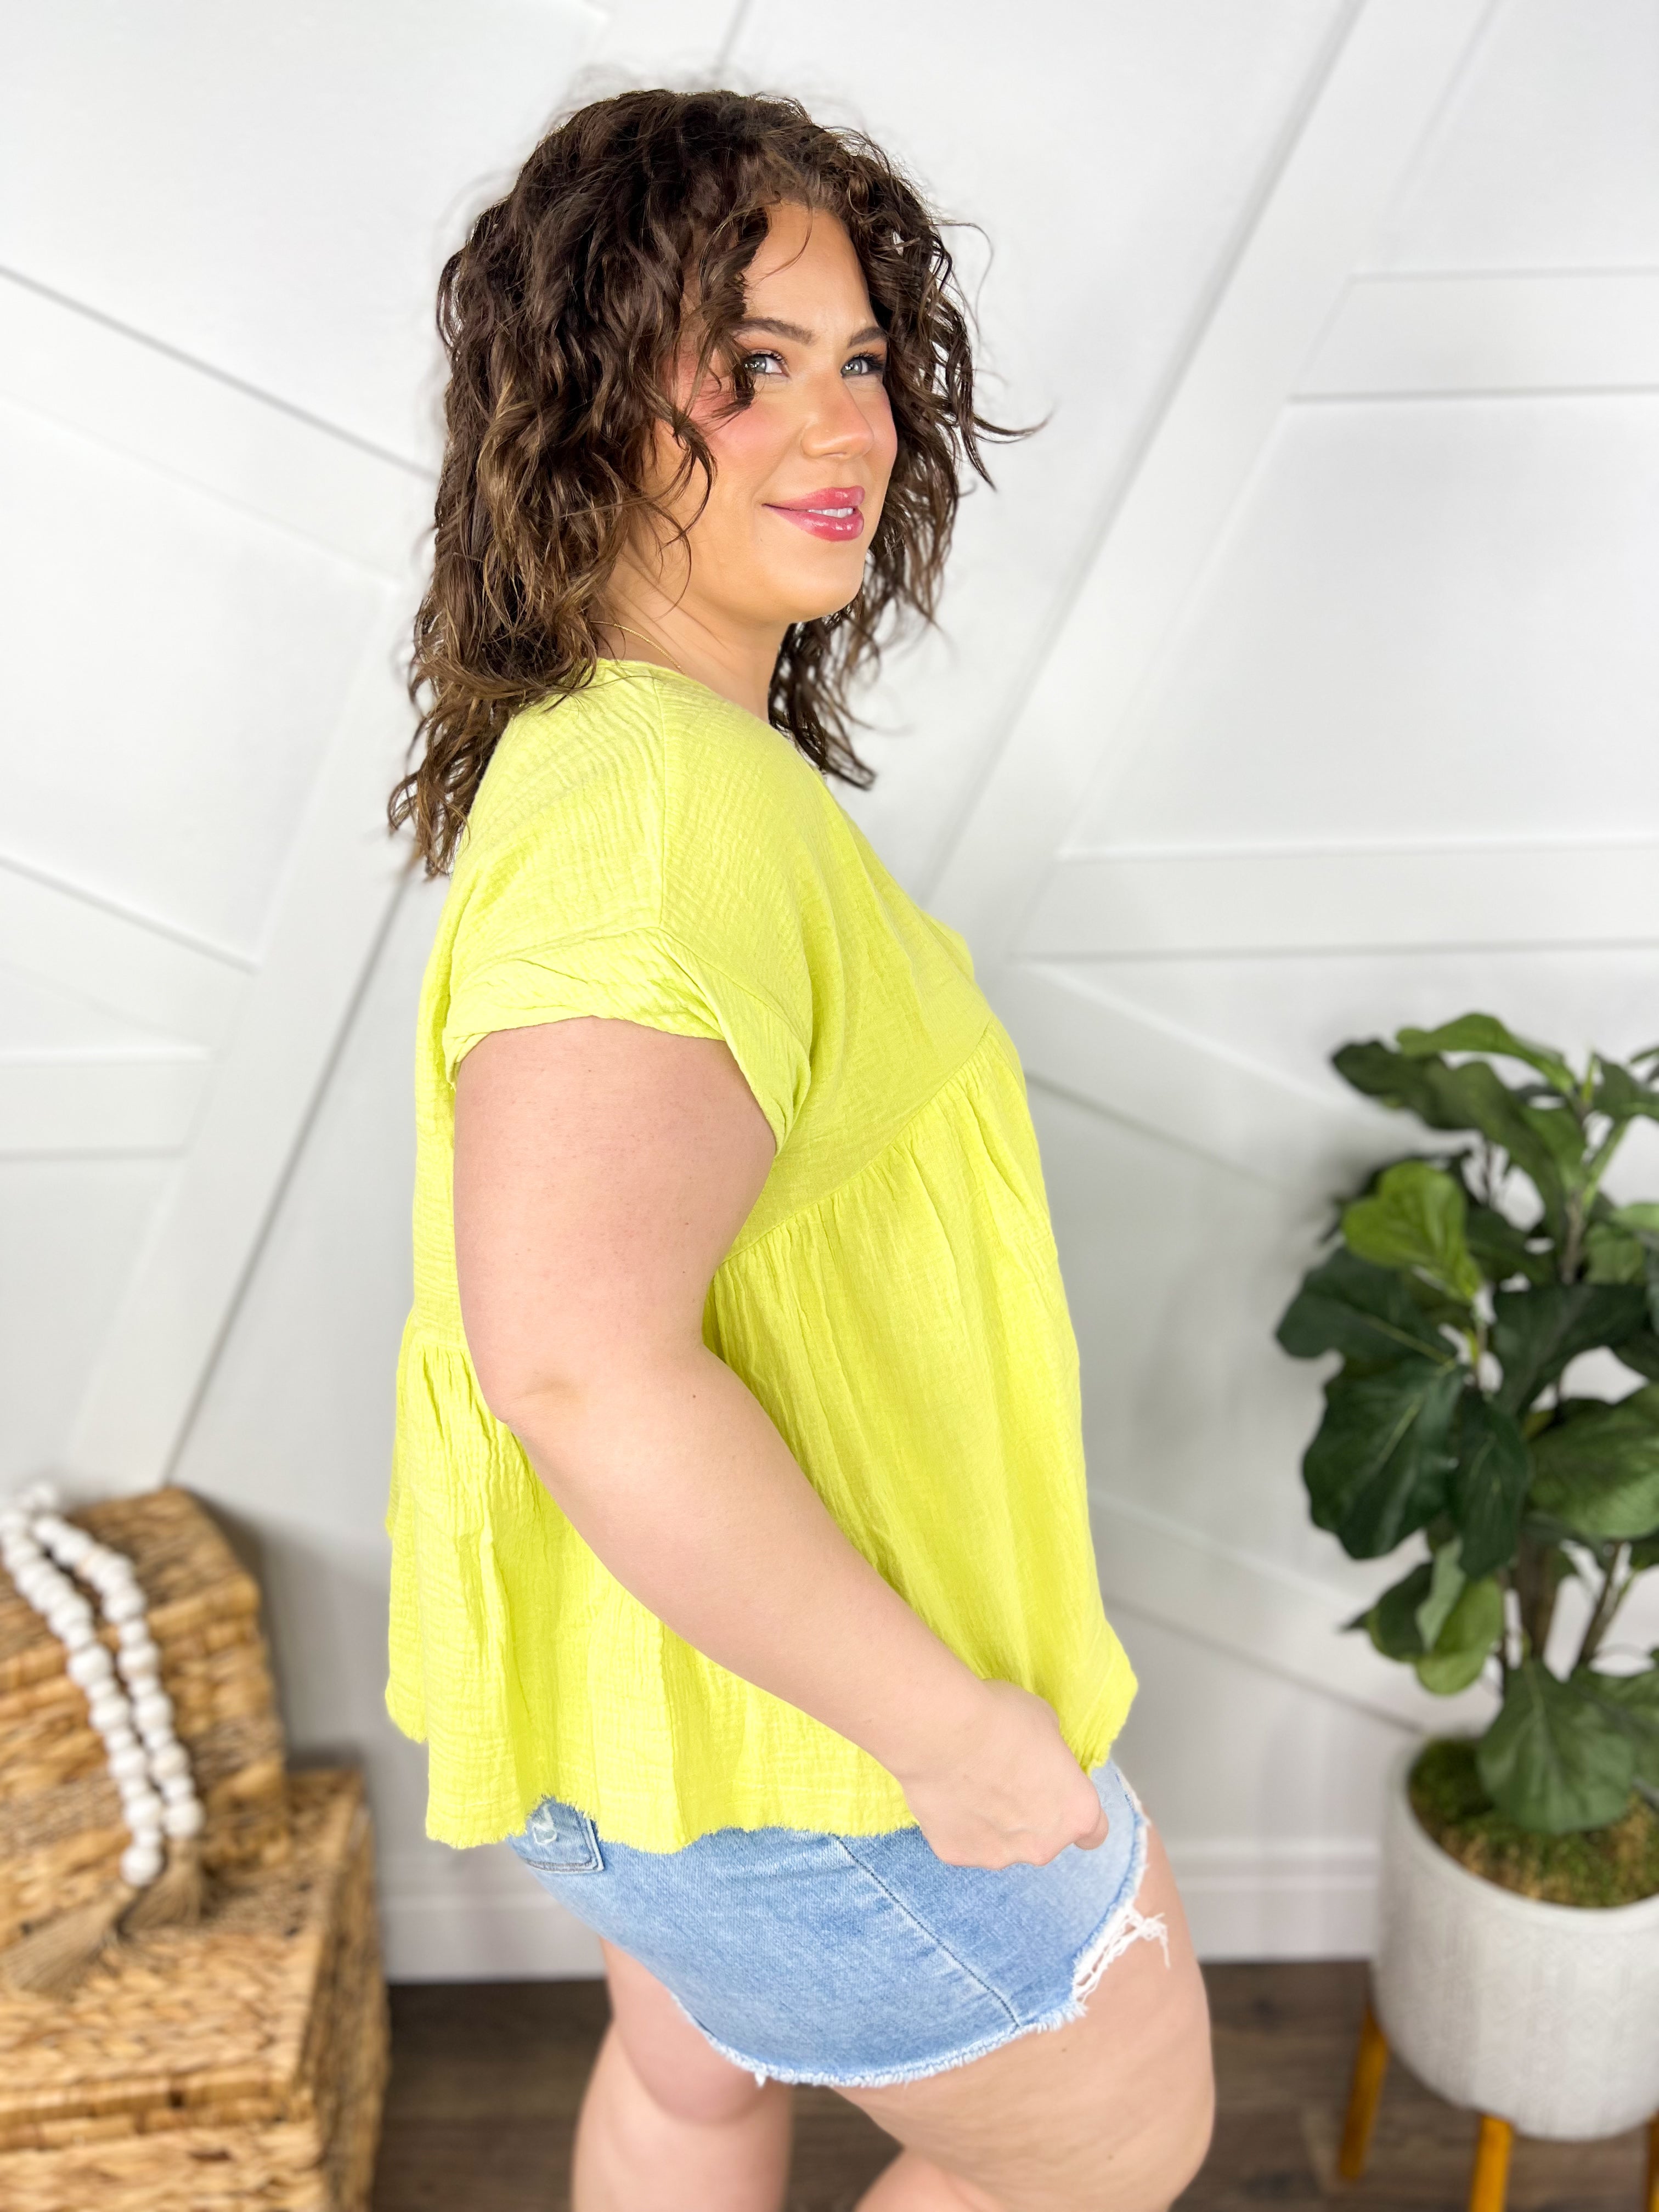 Free Spirit Blouse Top-110 Short Sleeve Top-Oddi-Heathered Boho Boutique, Women's Fashion and Accessories in Palmetto, FL